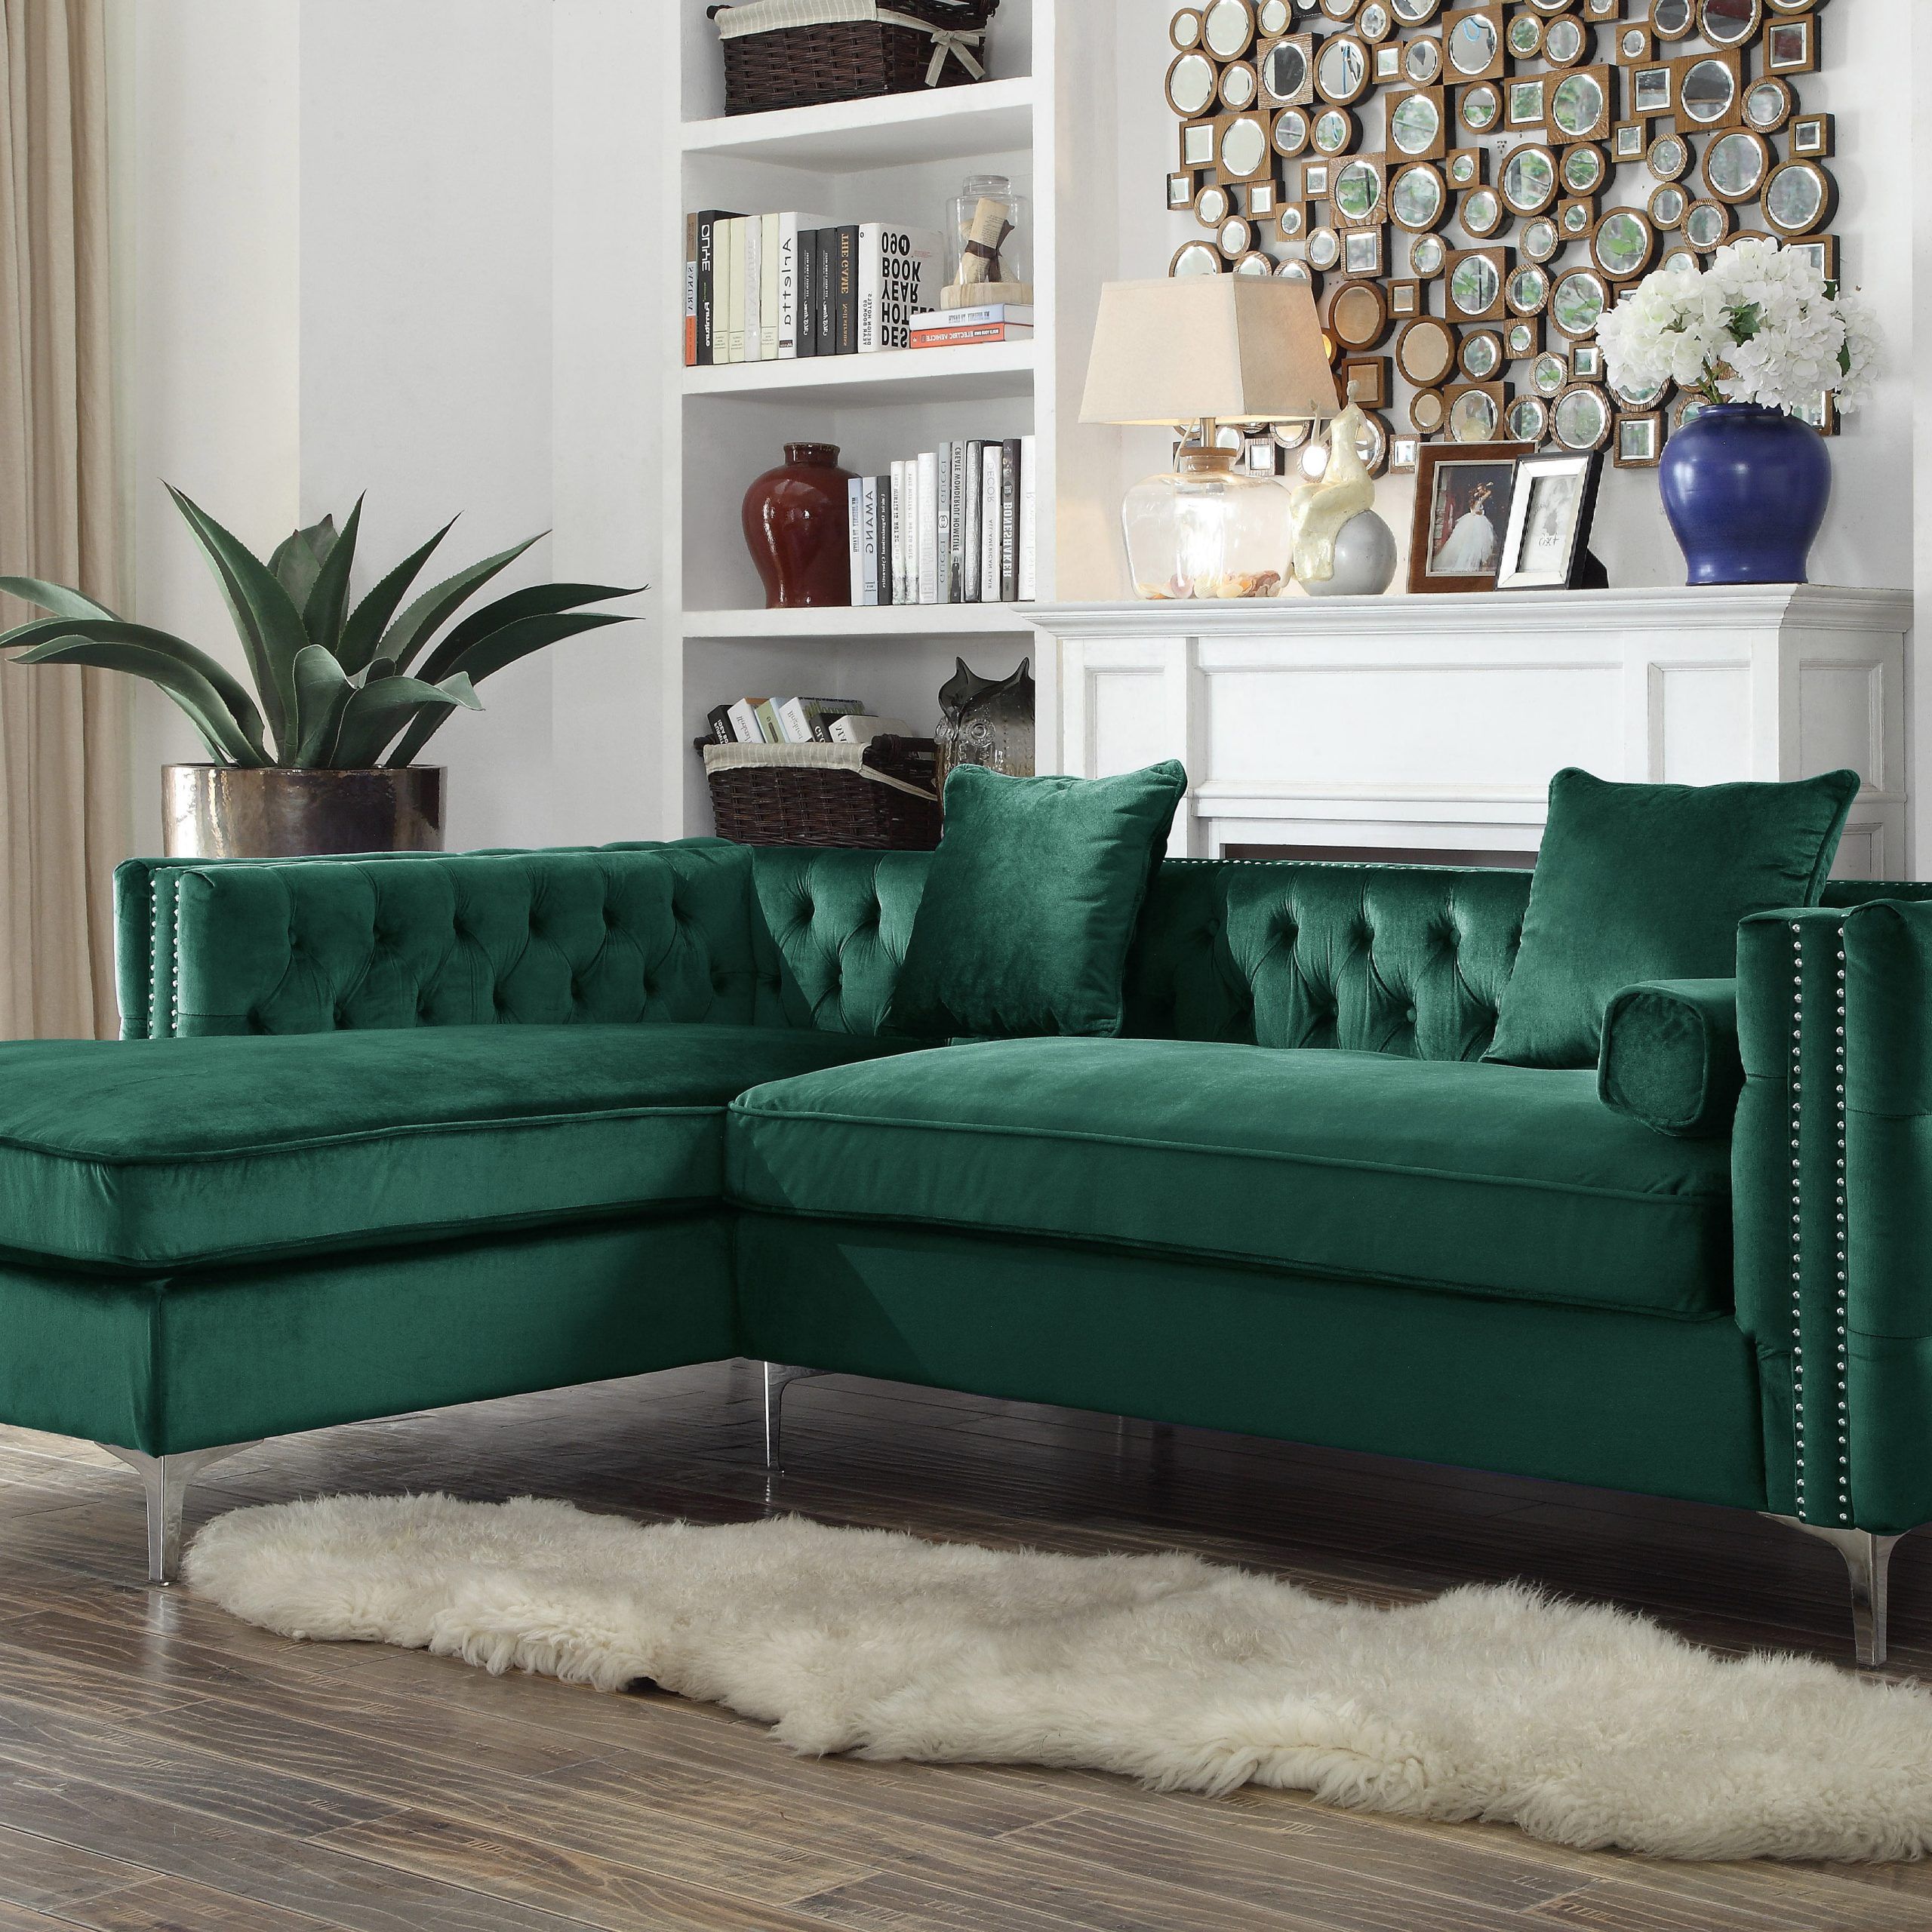 Preferred Green Velvet Modular Sectionals Intended For Chic Home Monet Velvet Modern Contemporary Button Tufted With Silver (View 13 of 15)